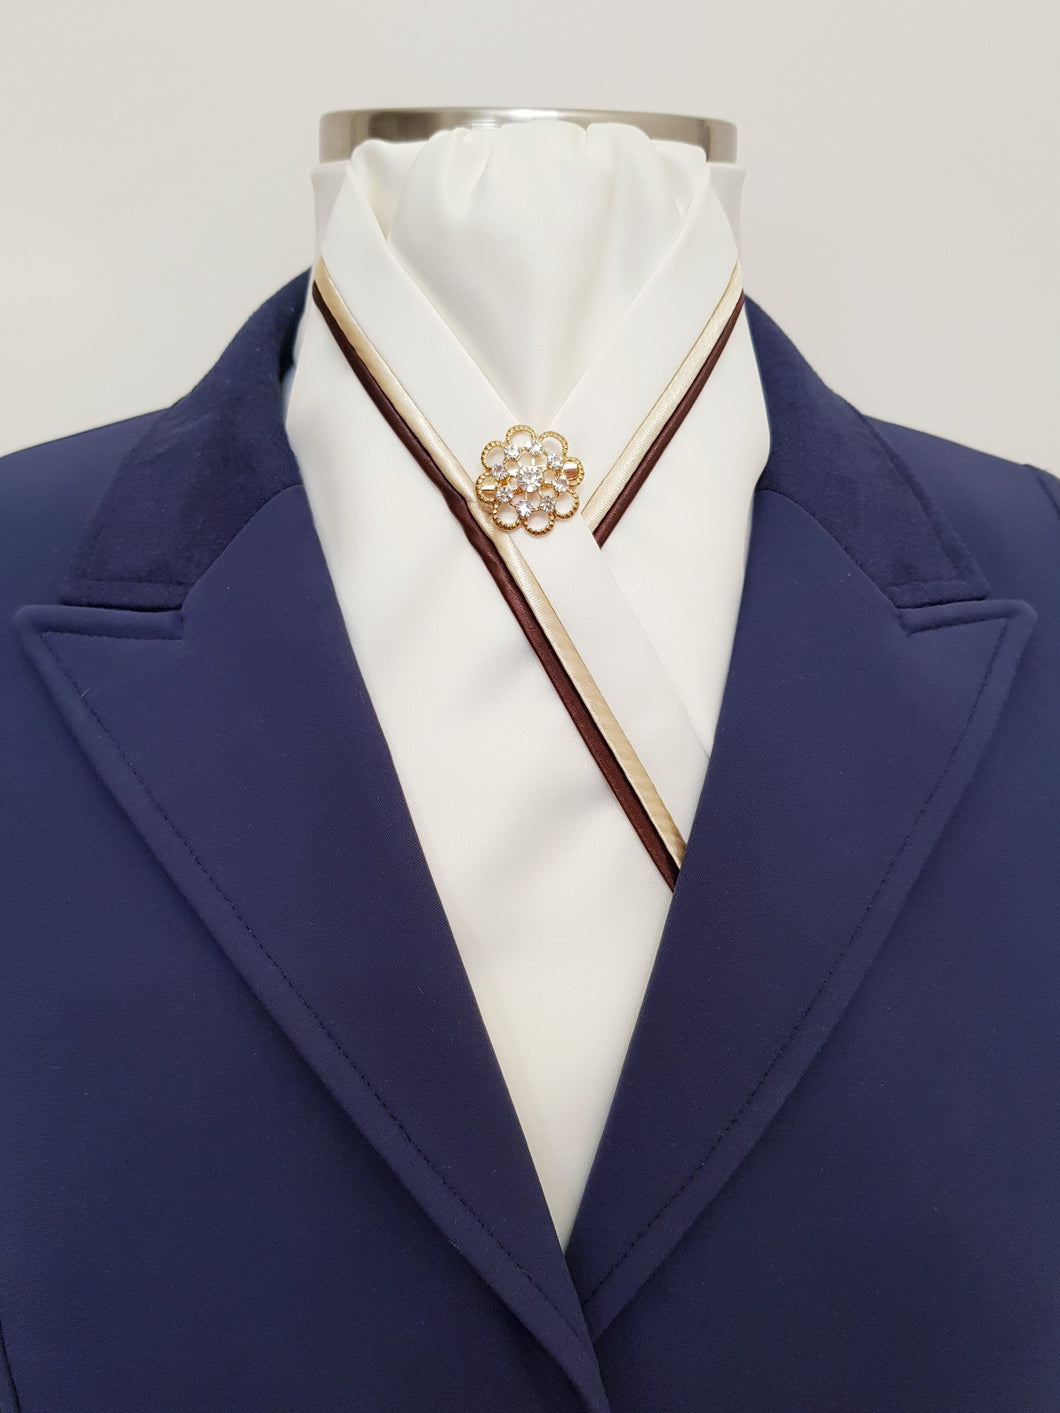 ERA RACHAEL STOCK TIE - Cream satin with brown and gold piping and brooch